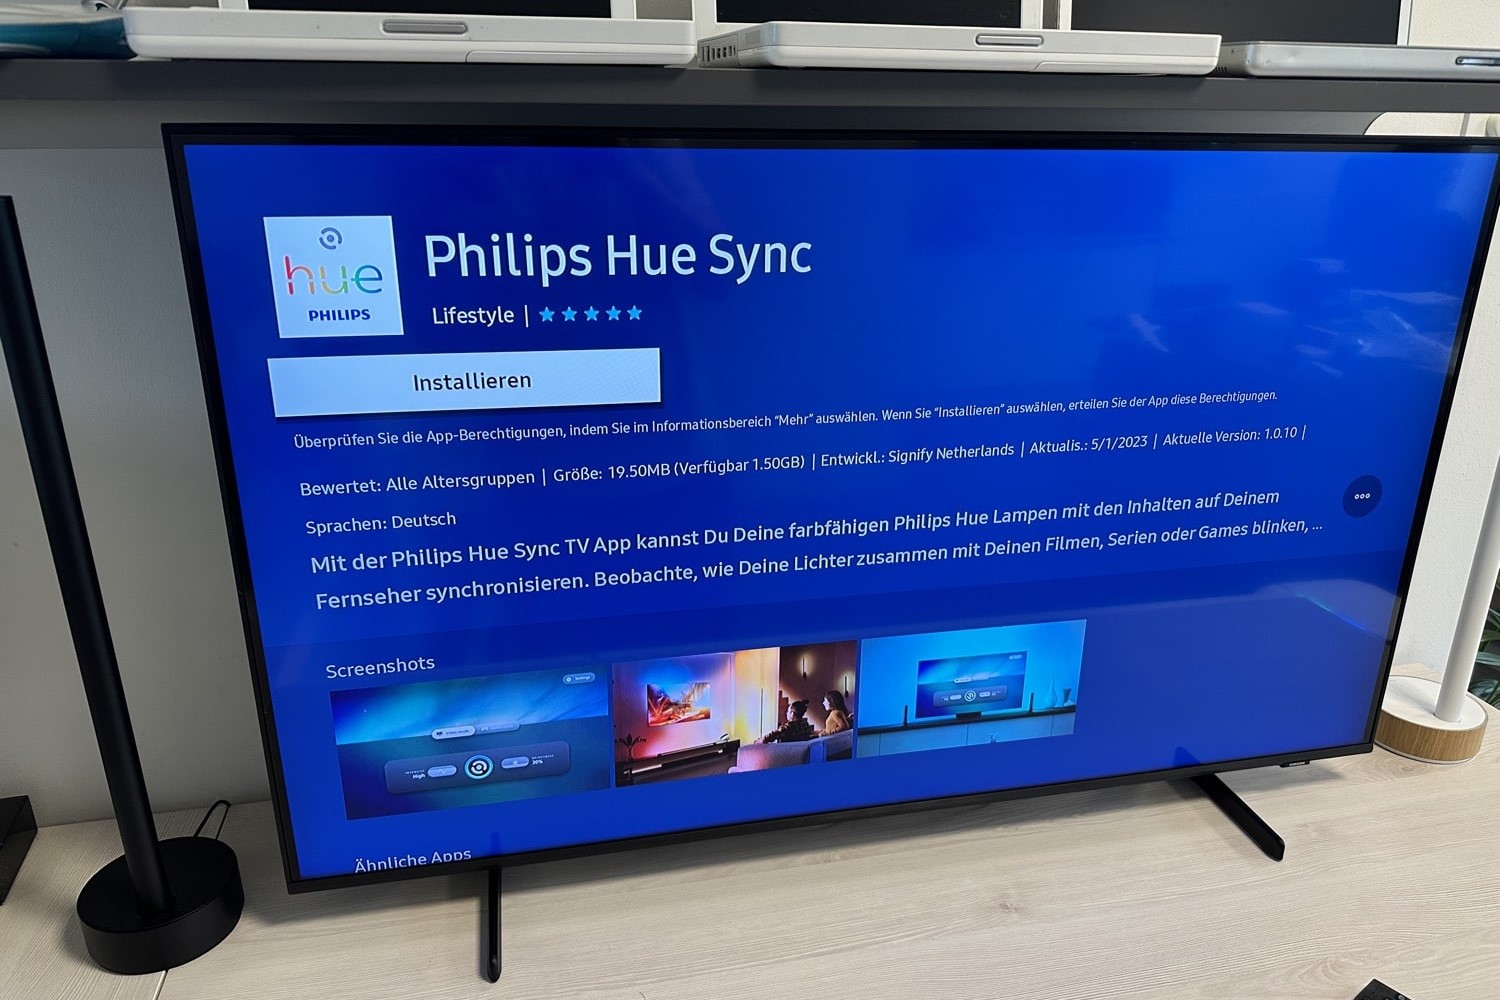 philips-hue-sync-stops-when-switching-users-on-windows